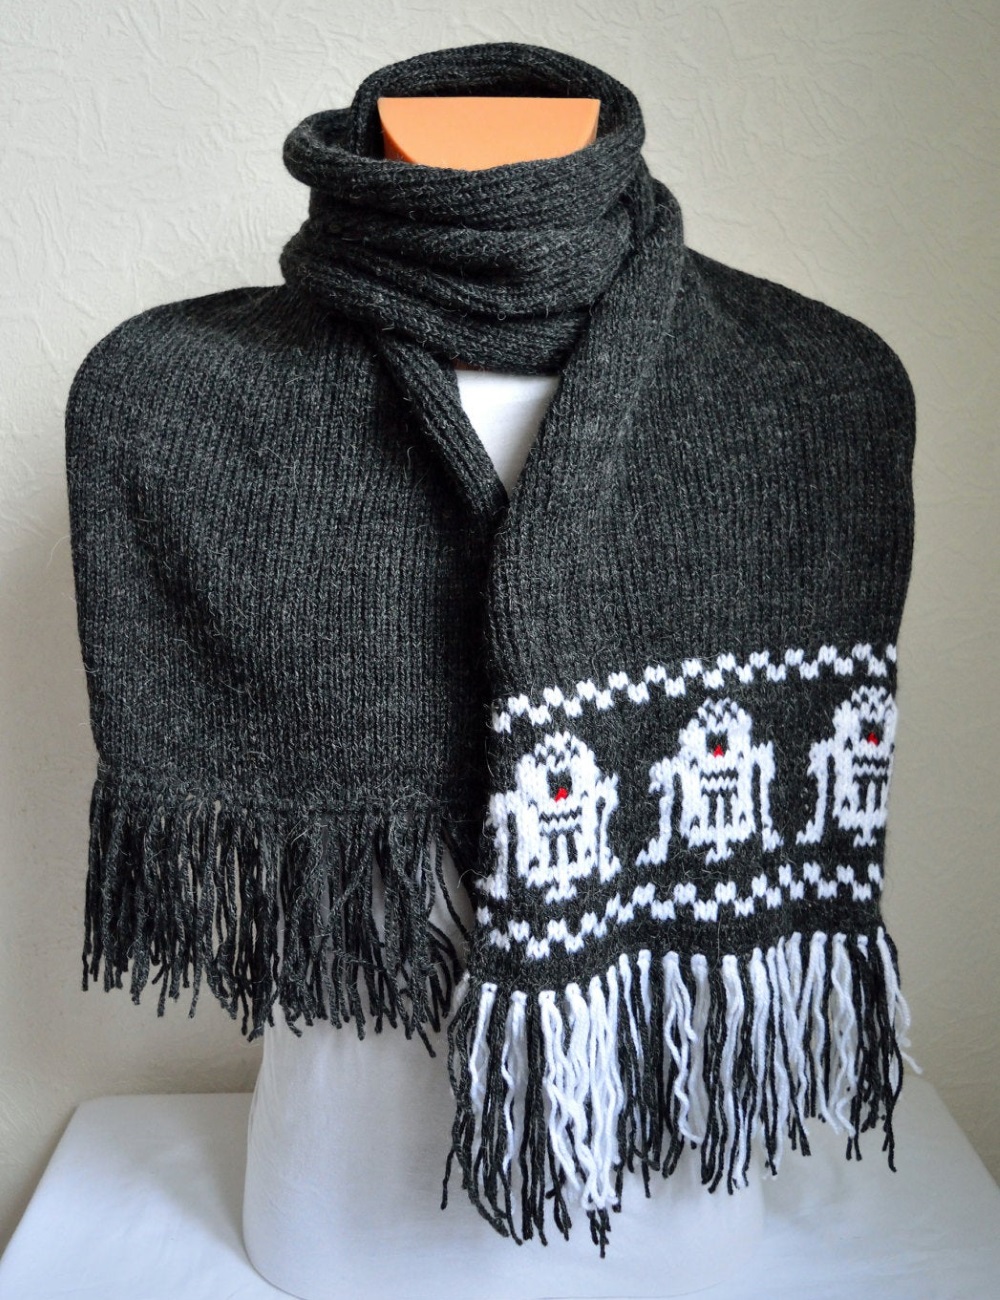 Star Wars Knitted Scarves by VidaKnitWorks on Etsy